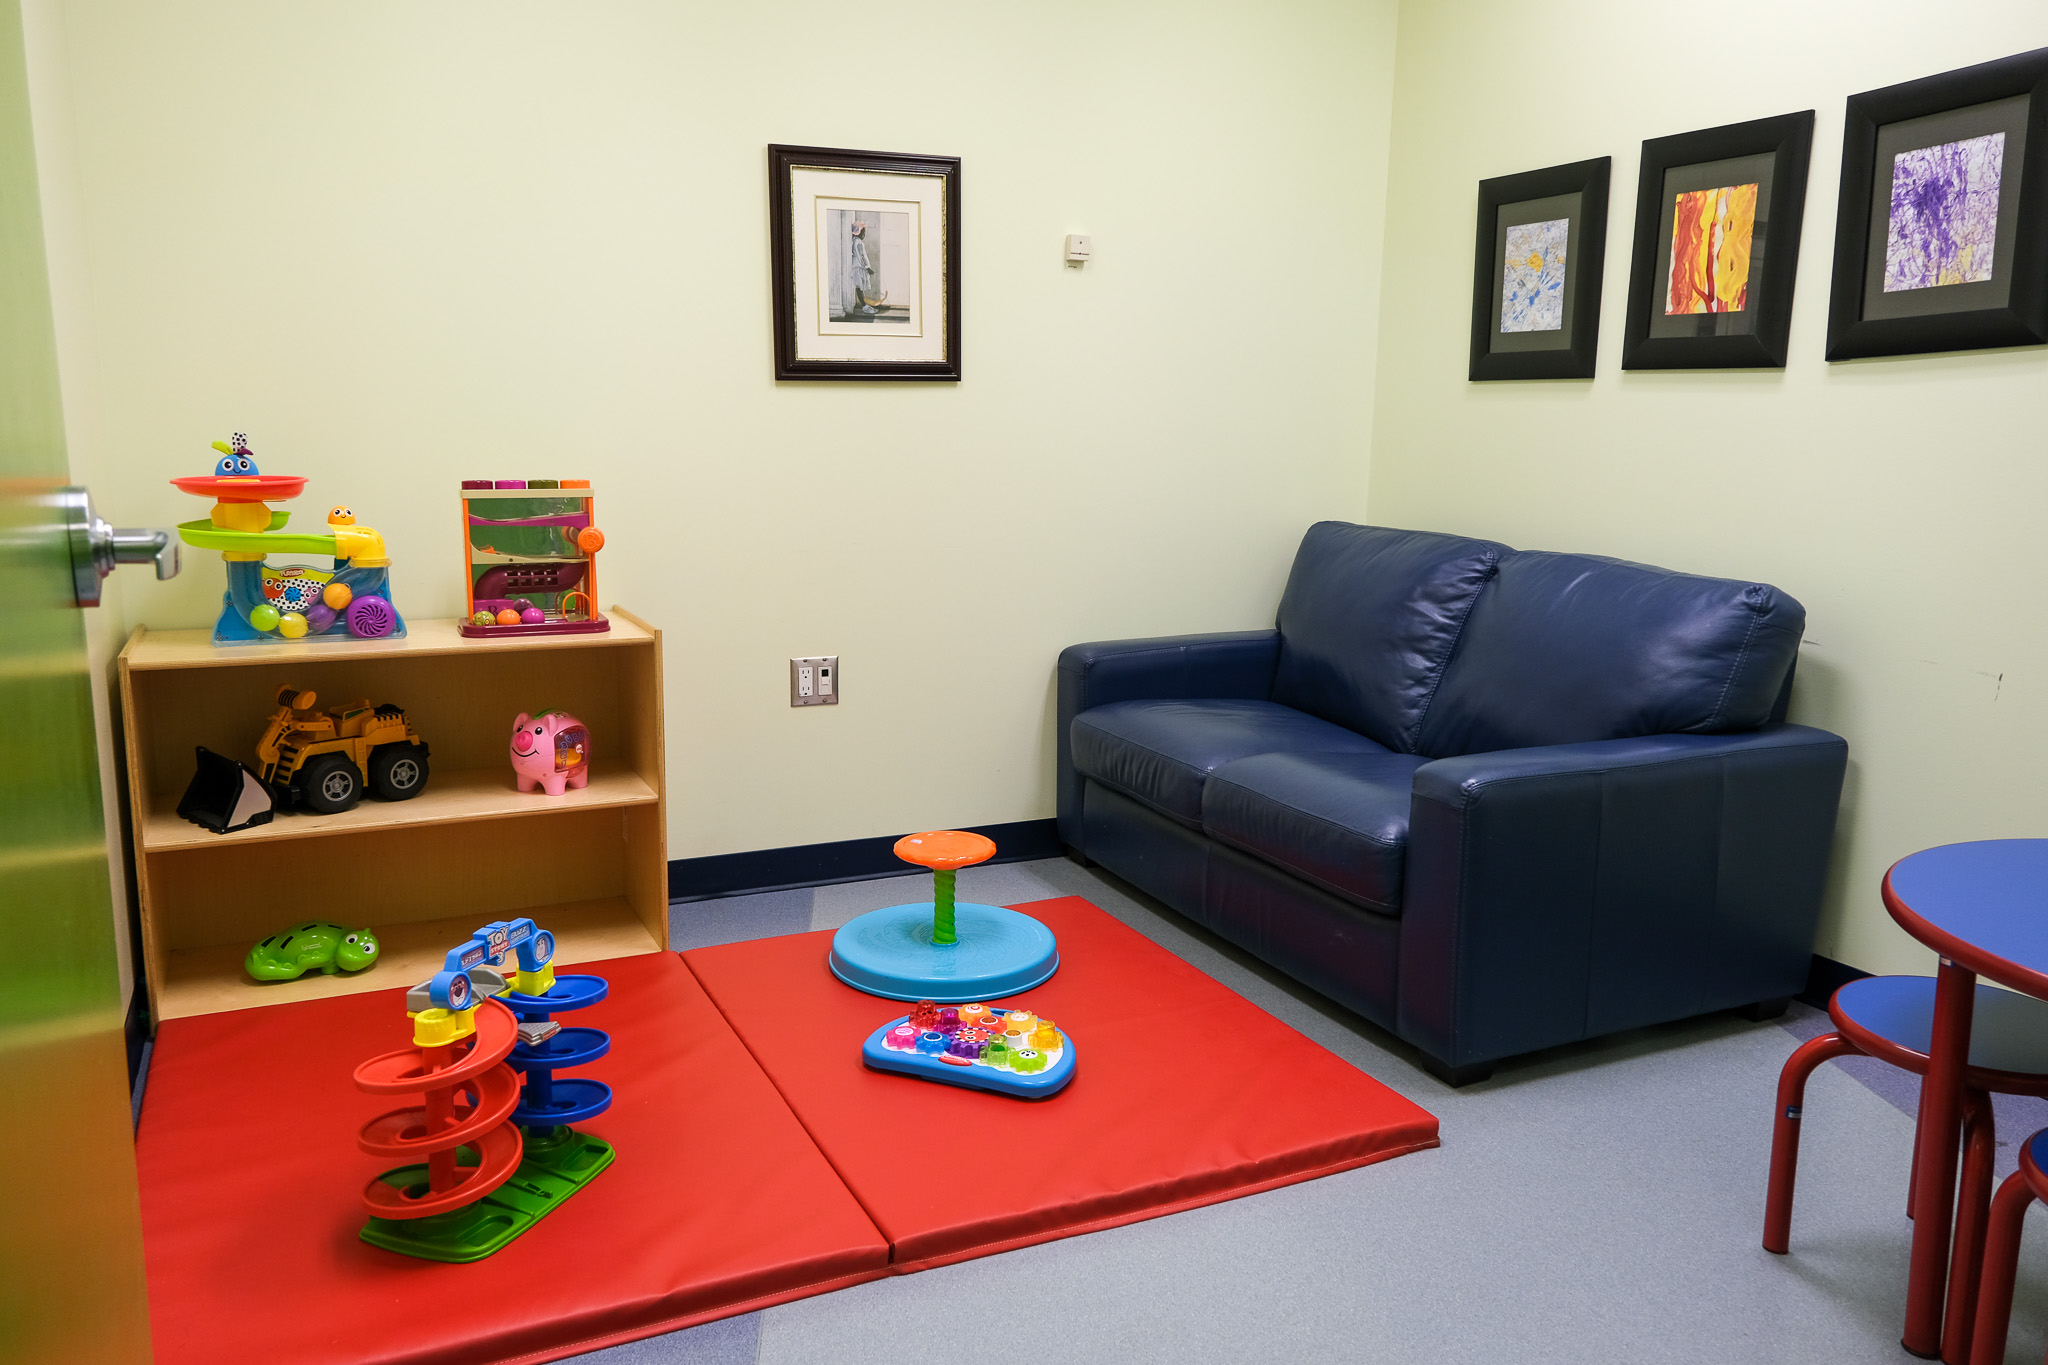 A treatment space set up with toys.